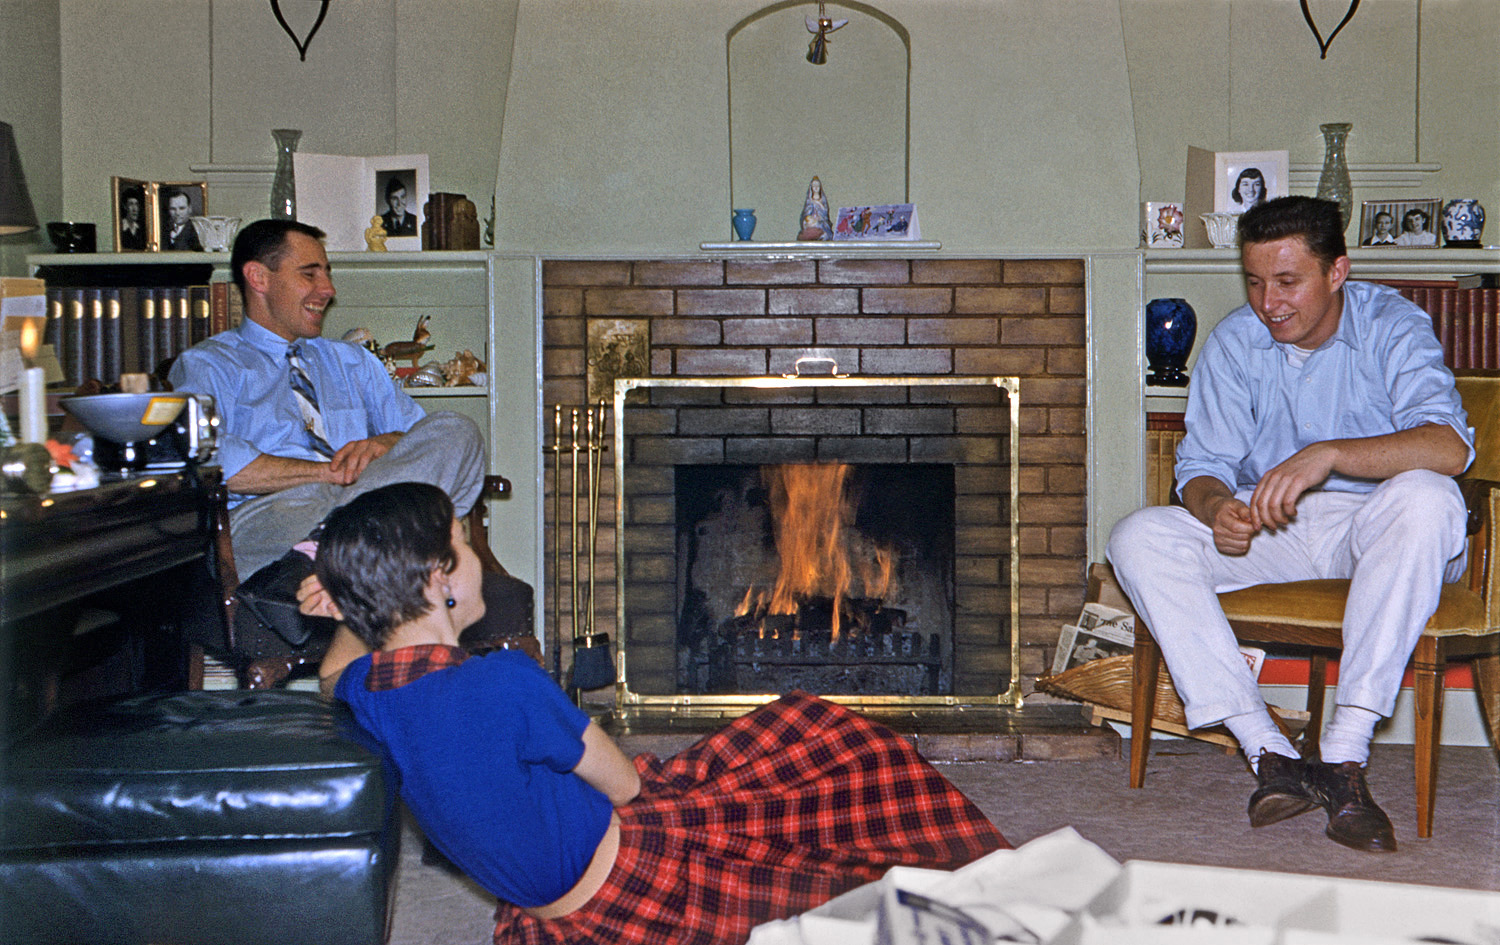 December 17, 1955. Tony W.'s baby shower photo, with the fireplace and shelves full of photos, books and bric-a-brac, was so exceedingly redolent of 1950s living rooms in general, and ours in particular, that I couldn't stand it, so I dug this one out, showing our fireplace and shelves full of our photos, books and bric-a-brac. That's my sister, with her future husband on the right, and my godmother's son on the left. That's him in Army uniform in the photo on the shelf above. My brother, bless him, wrote the actual date on the slide mount, but we can tell it's near Christmas by my sister's home-made angel ornament hanging in the niche as well as the box of tree ornaments in the lower right foreground. Another point of interest is the candle burning at the extreme left. It's functional, not ornamental; this was taken during a power outage occasioned by the record Northern California December 1955 storms. Also on the table next to the candle is my sister's Kodak Duaflex camera with flash attachment. View full size.